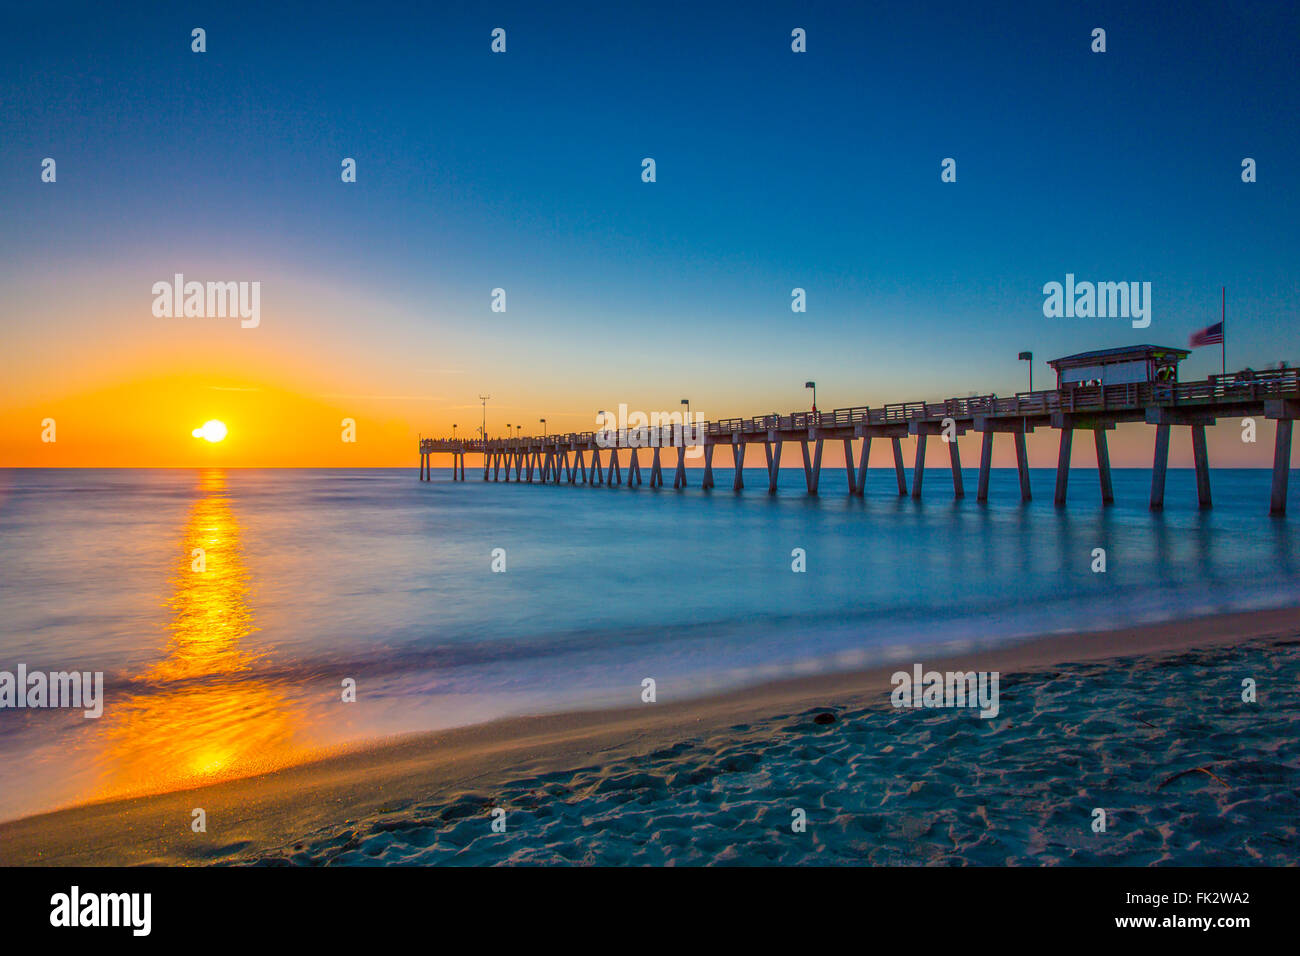 Sunset over Gulf of Mexico and Venice Pier in Venice Florida Stock Photo